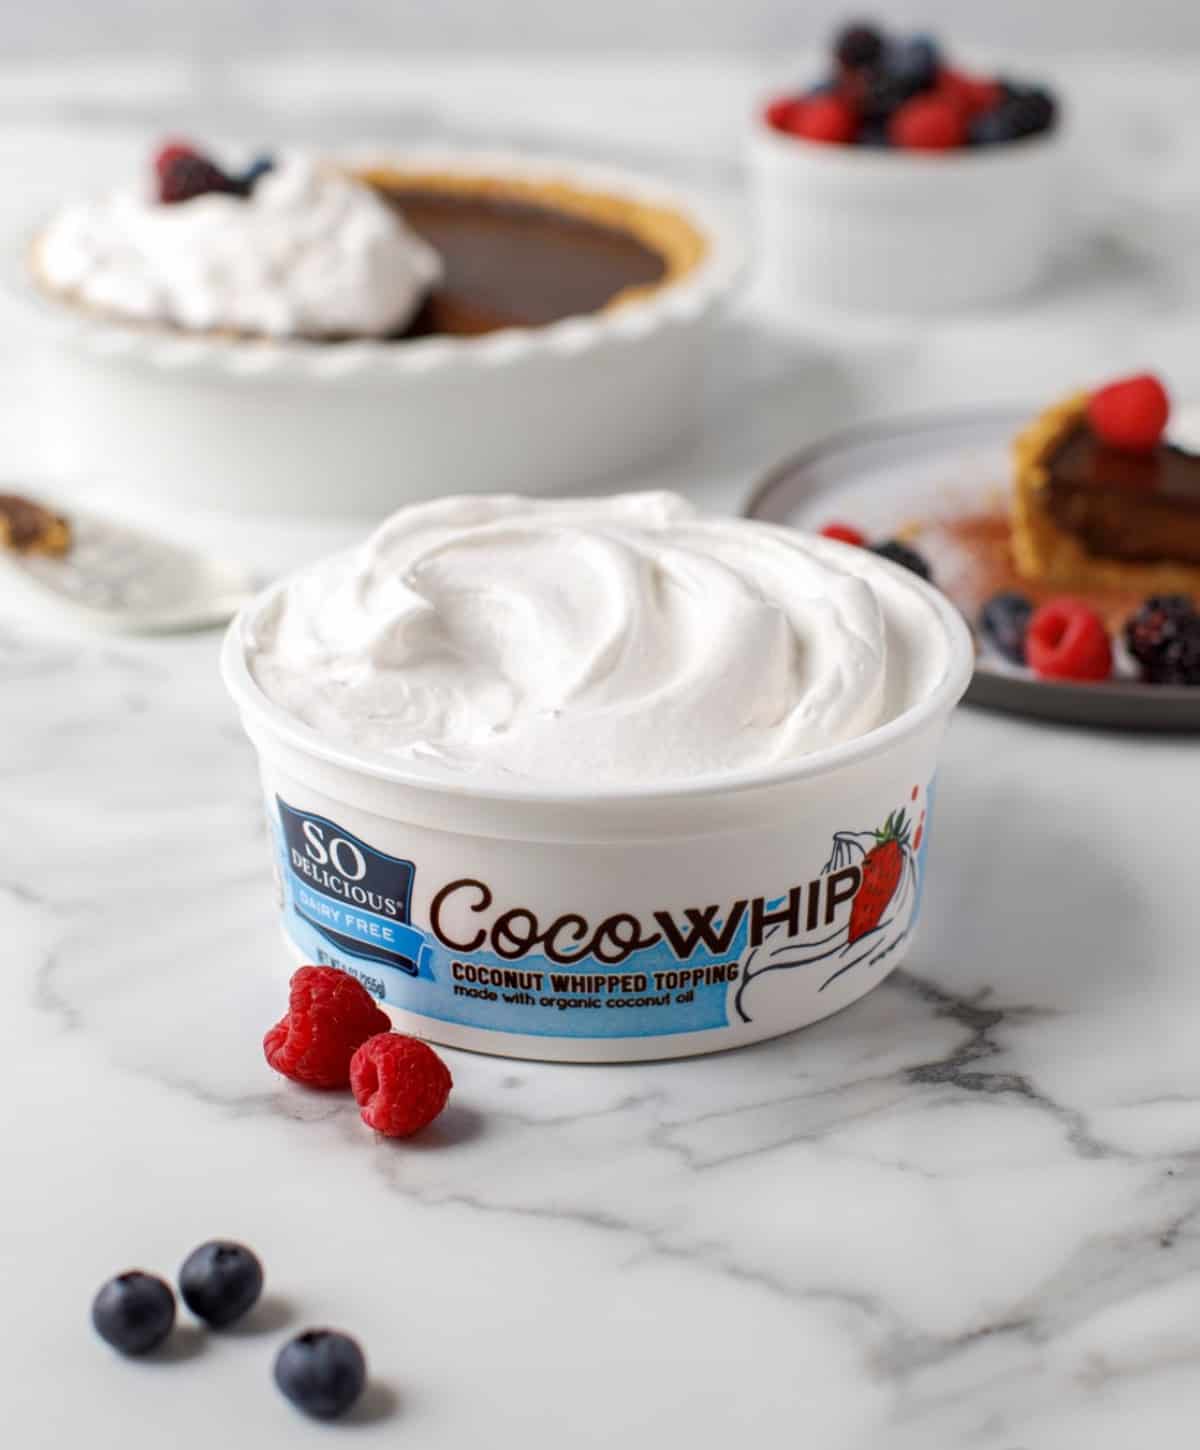 Container of So Delicious Coco Whip dairy-free coconut whipped cream served with pie.